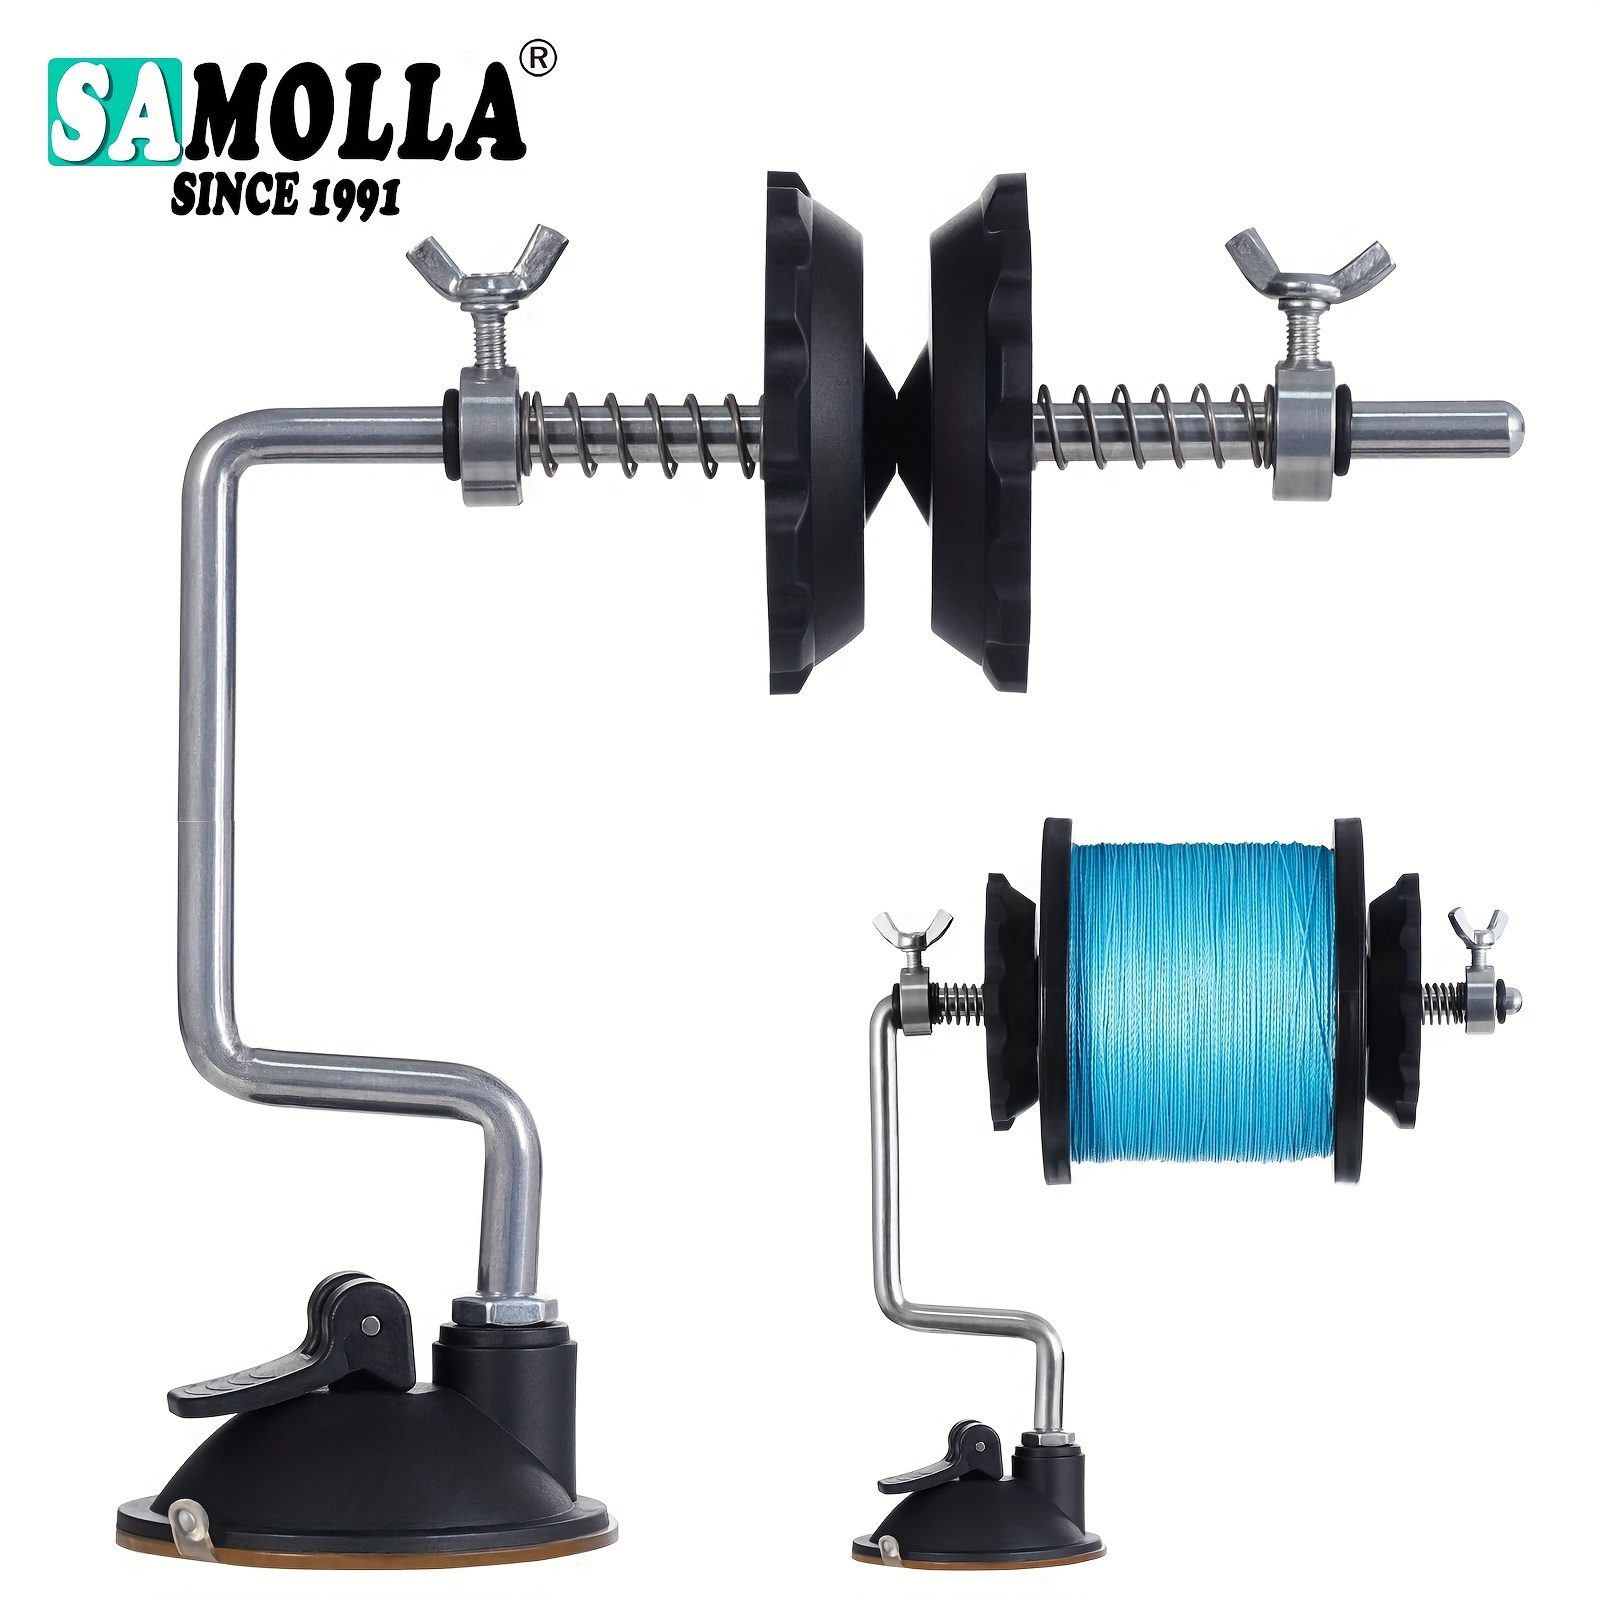 Fishing Line Spooling - Portable Line Spooler Winder Tensioner, Shop  Today. Get it Tomorrow!